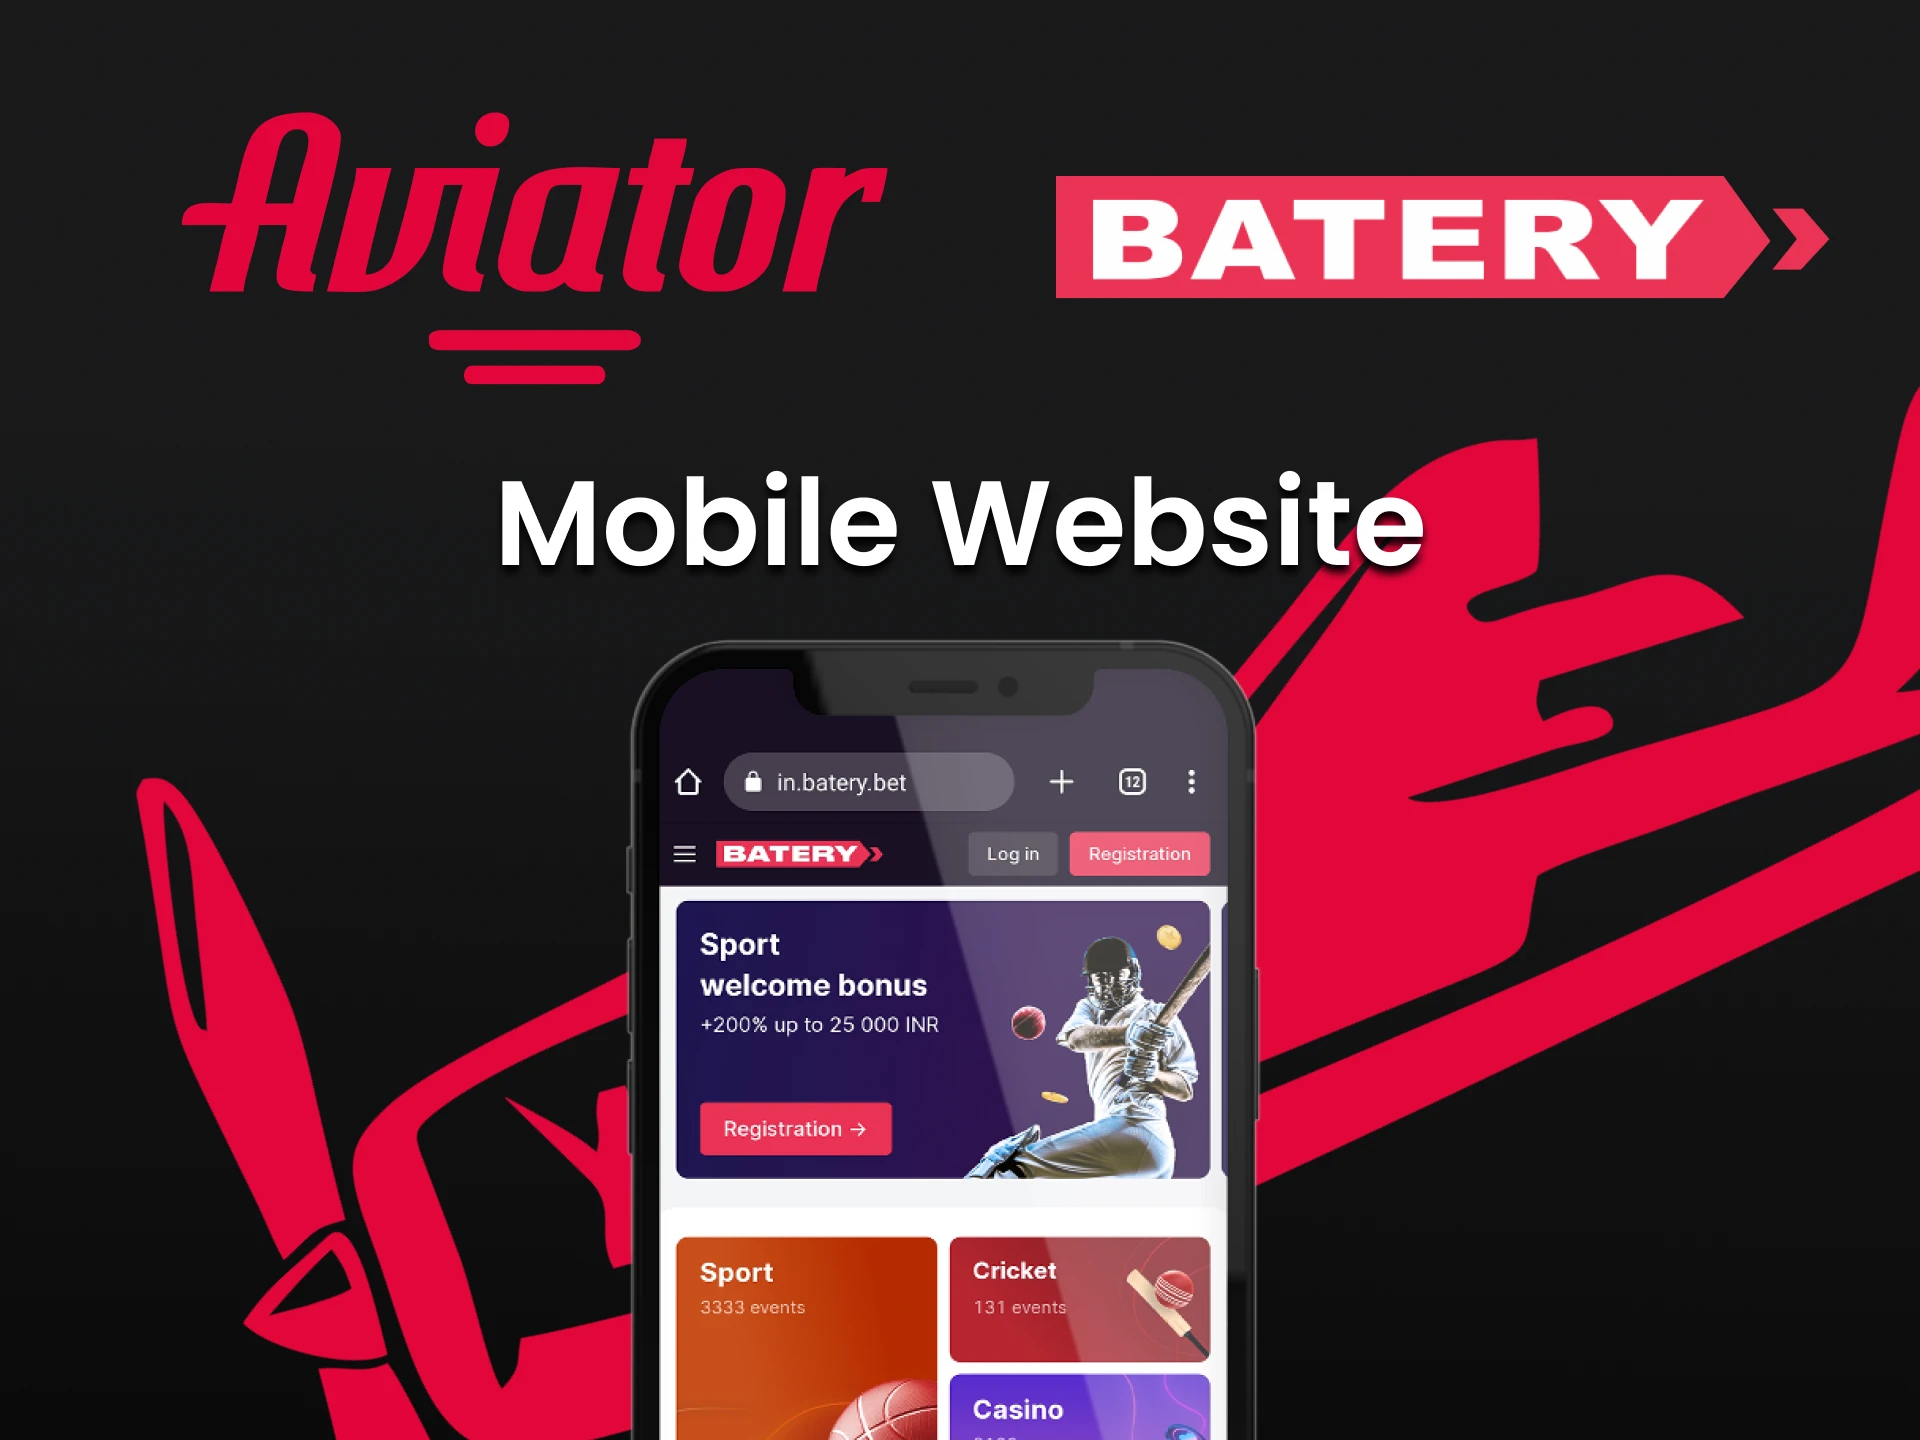 Play Aviator through the Batery website on your phone.